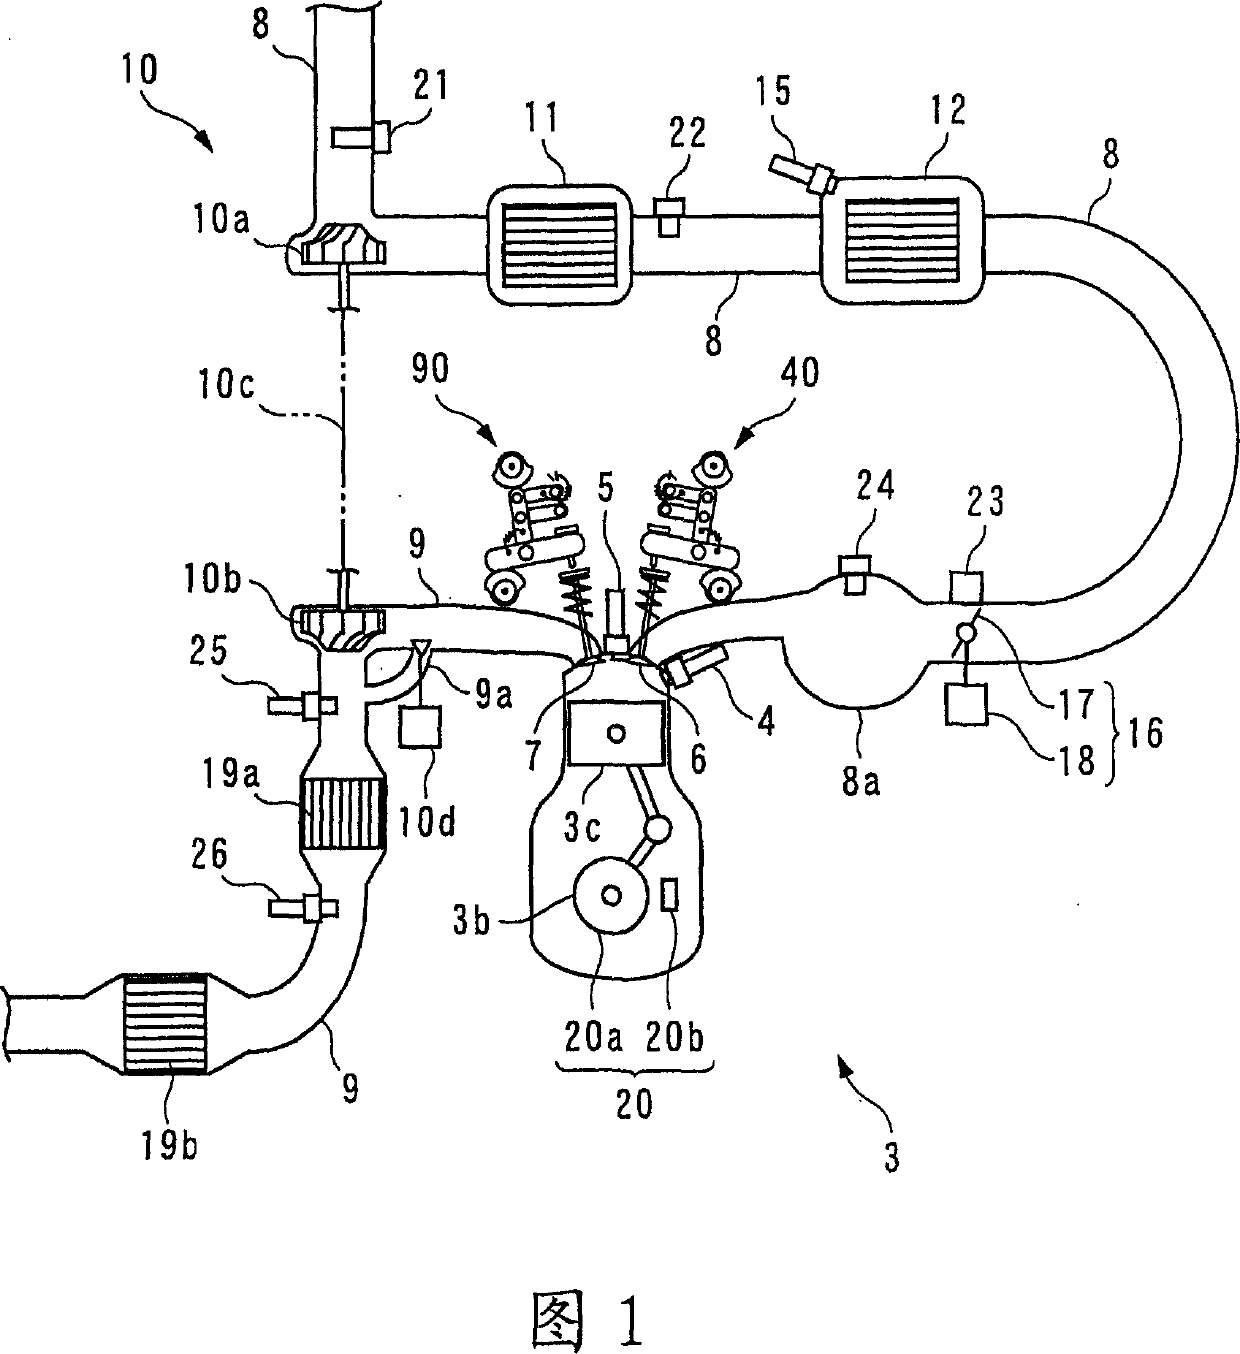 Intake air volume controller of internal combustion engine